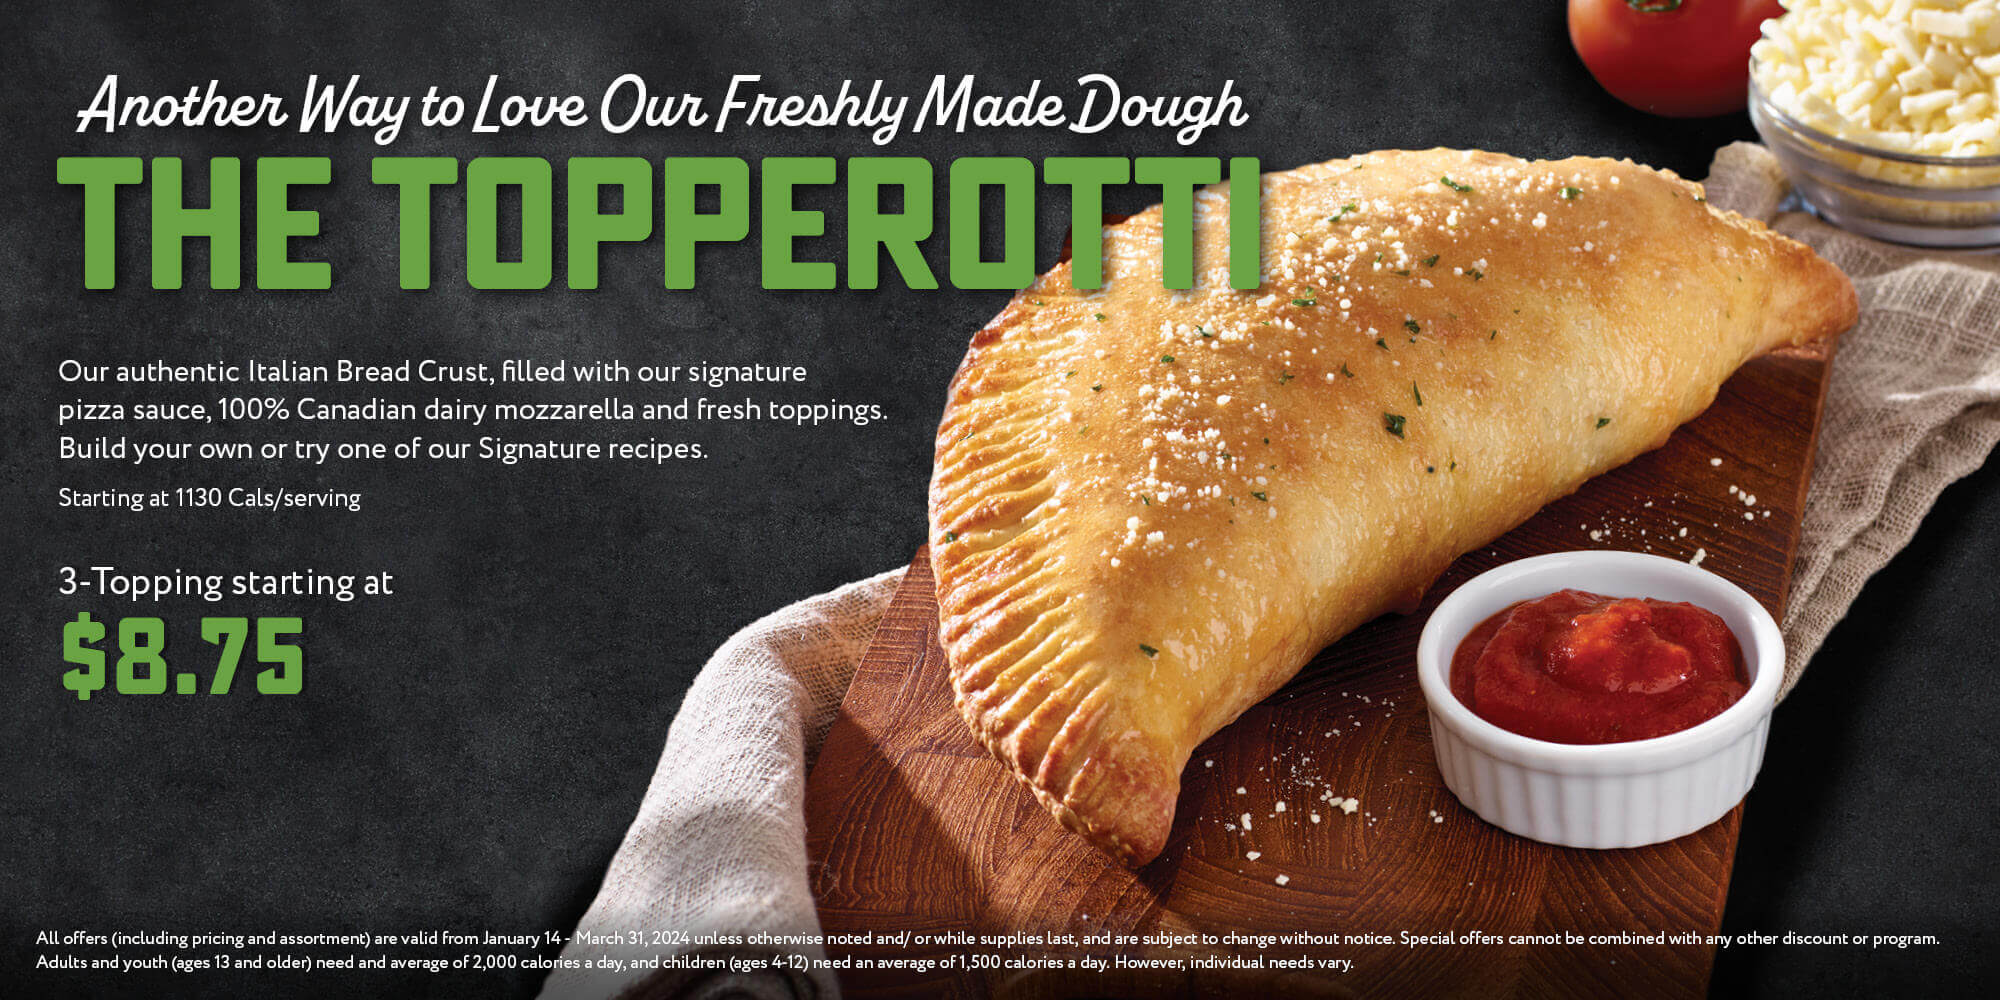 The topperotti - 3 topping starting at $8.75